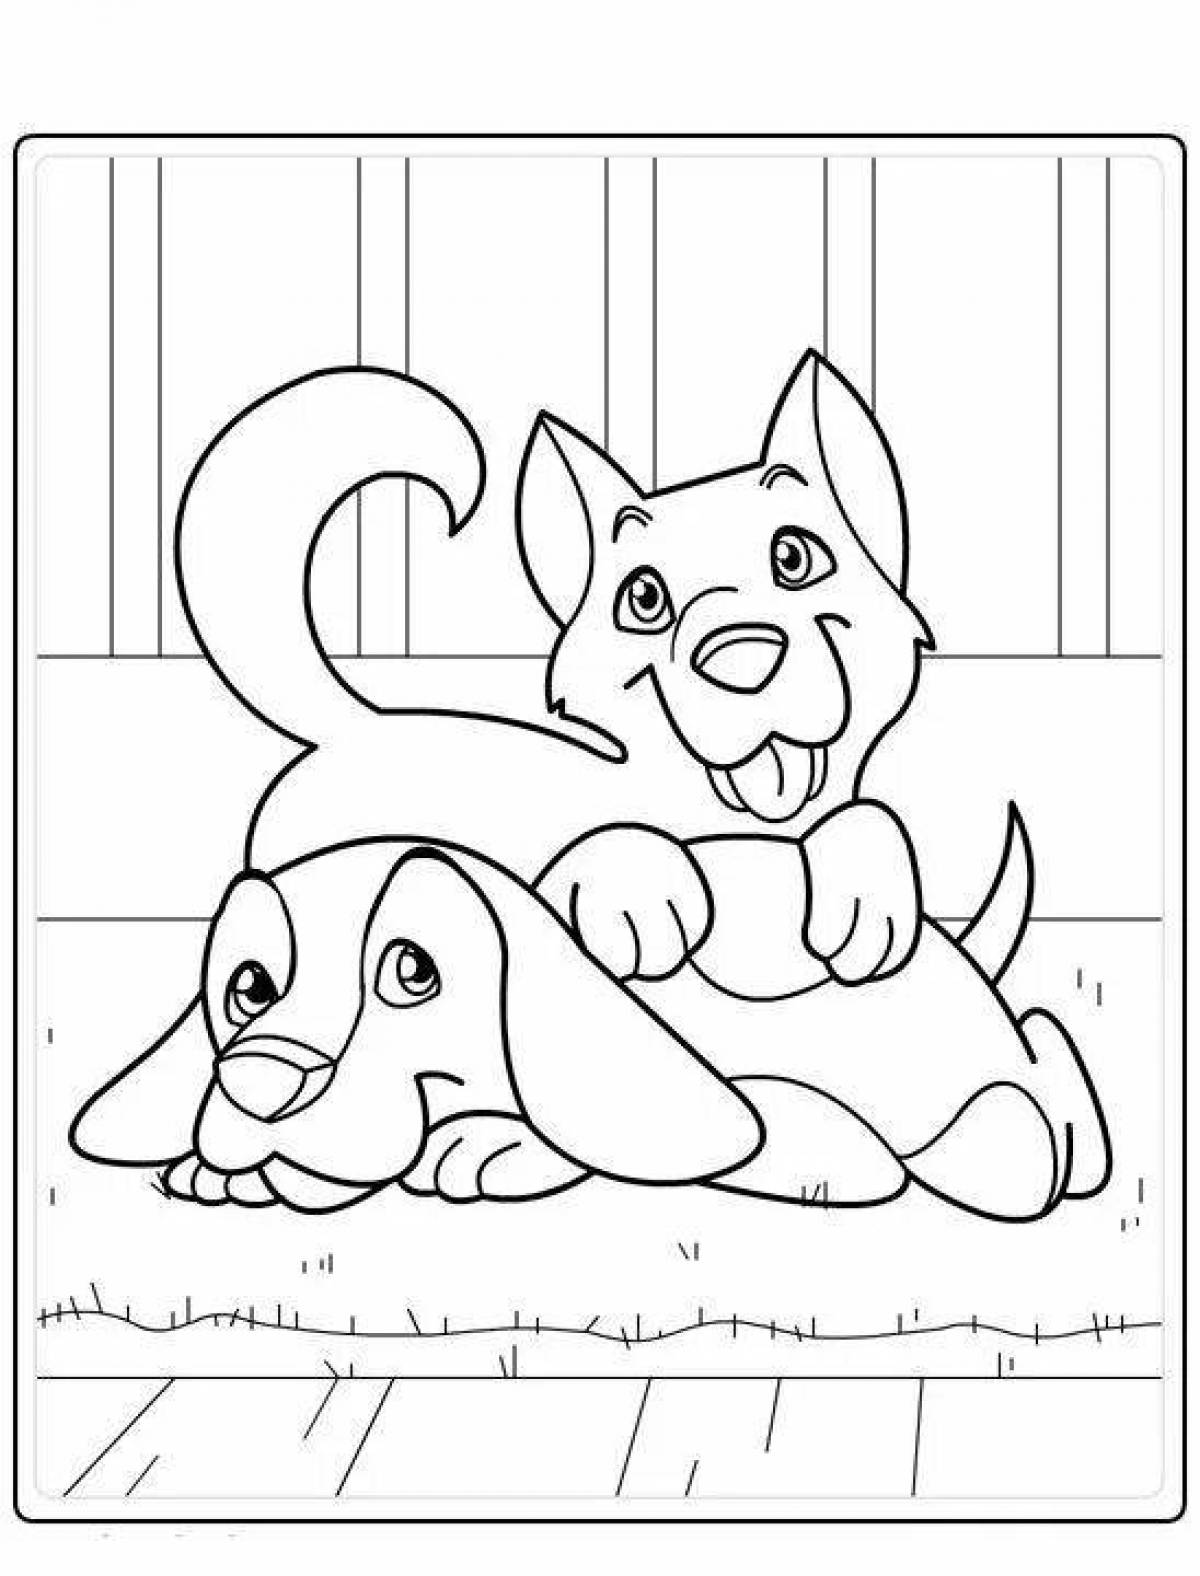 Coloring dogs and cats for kids